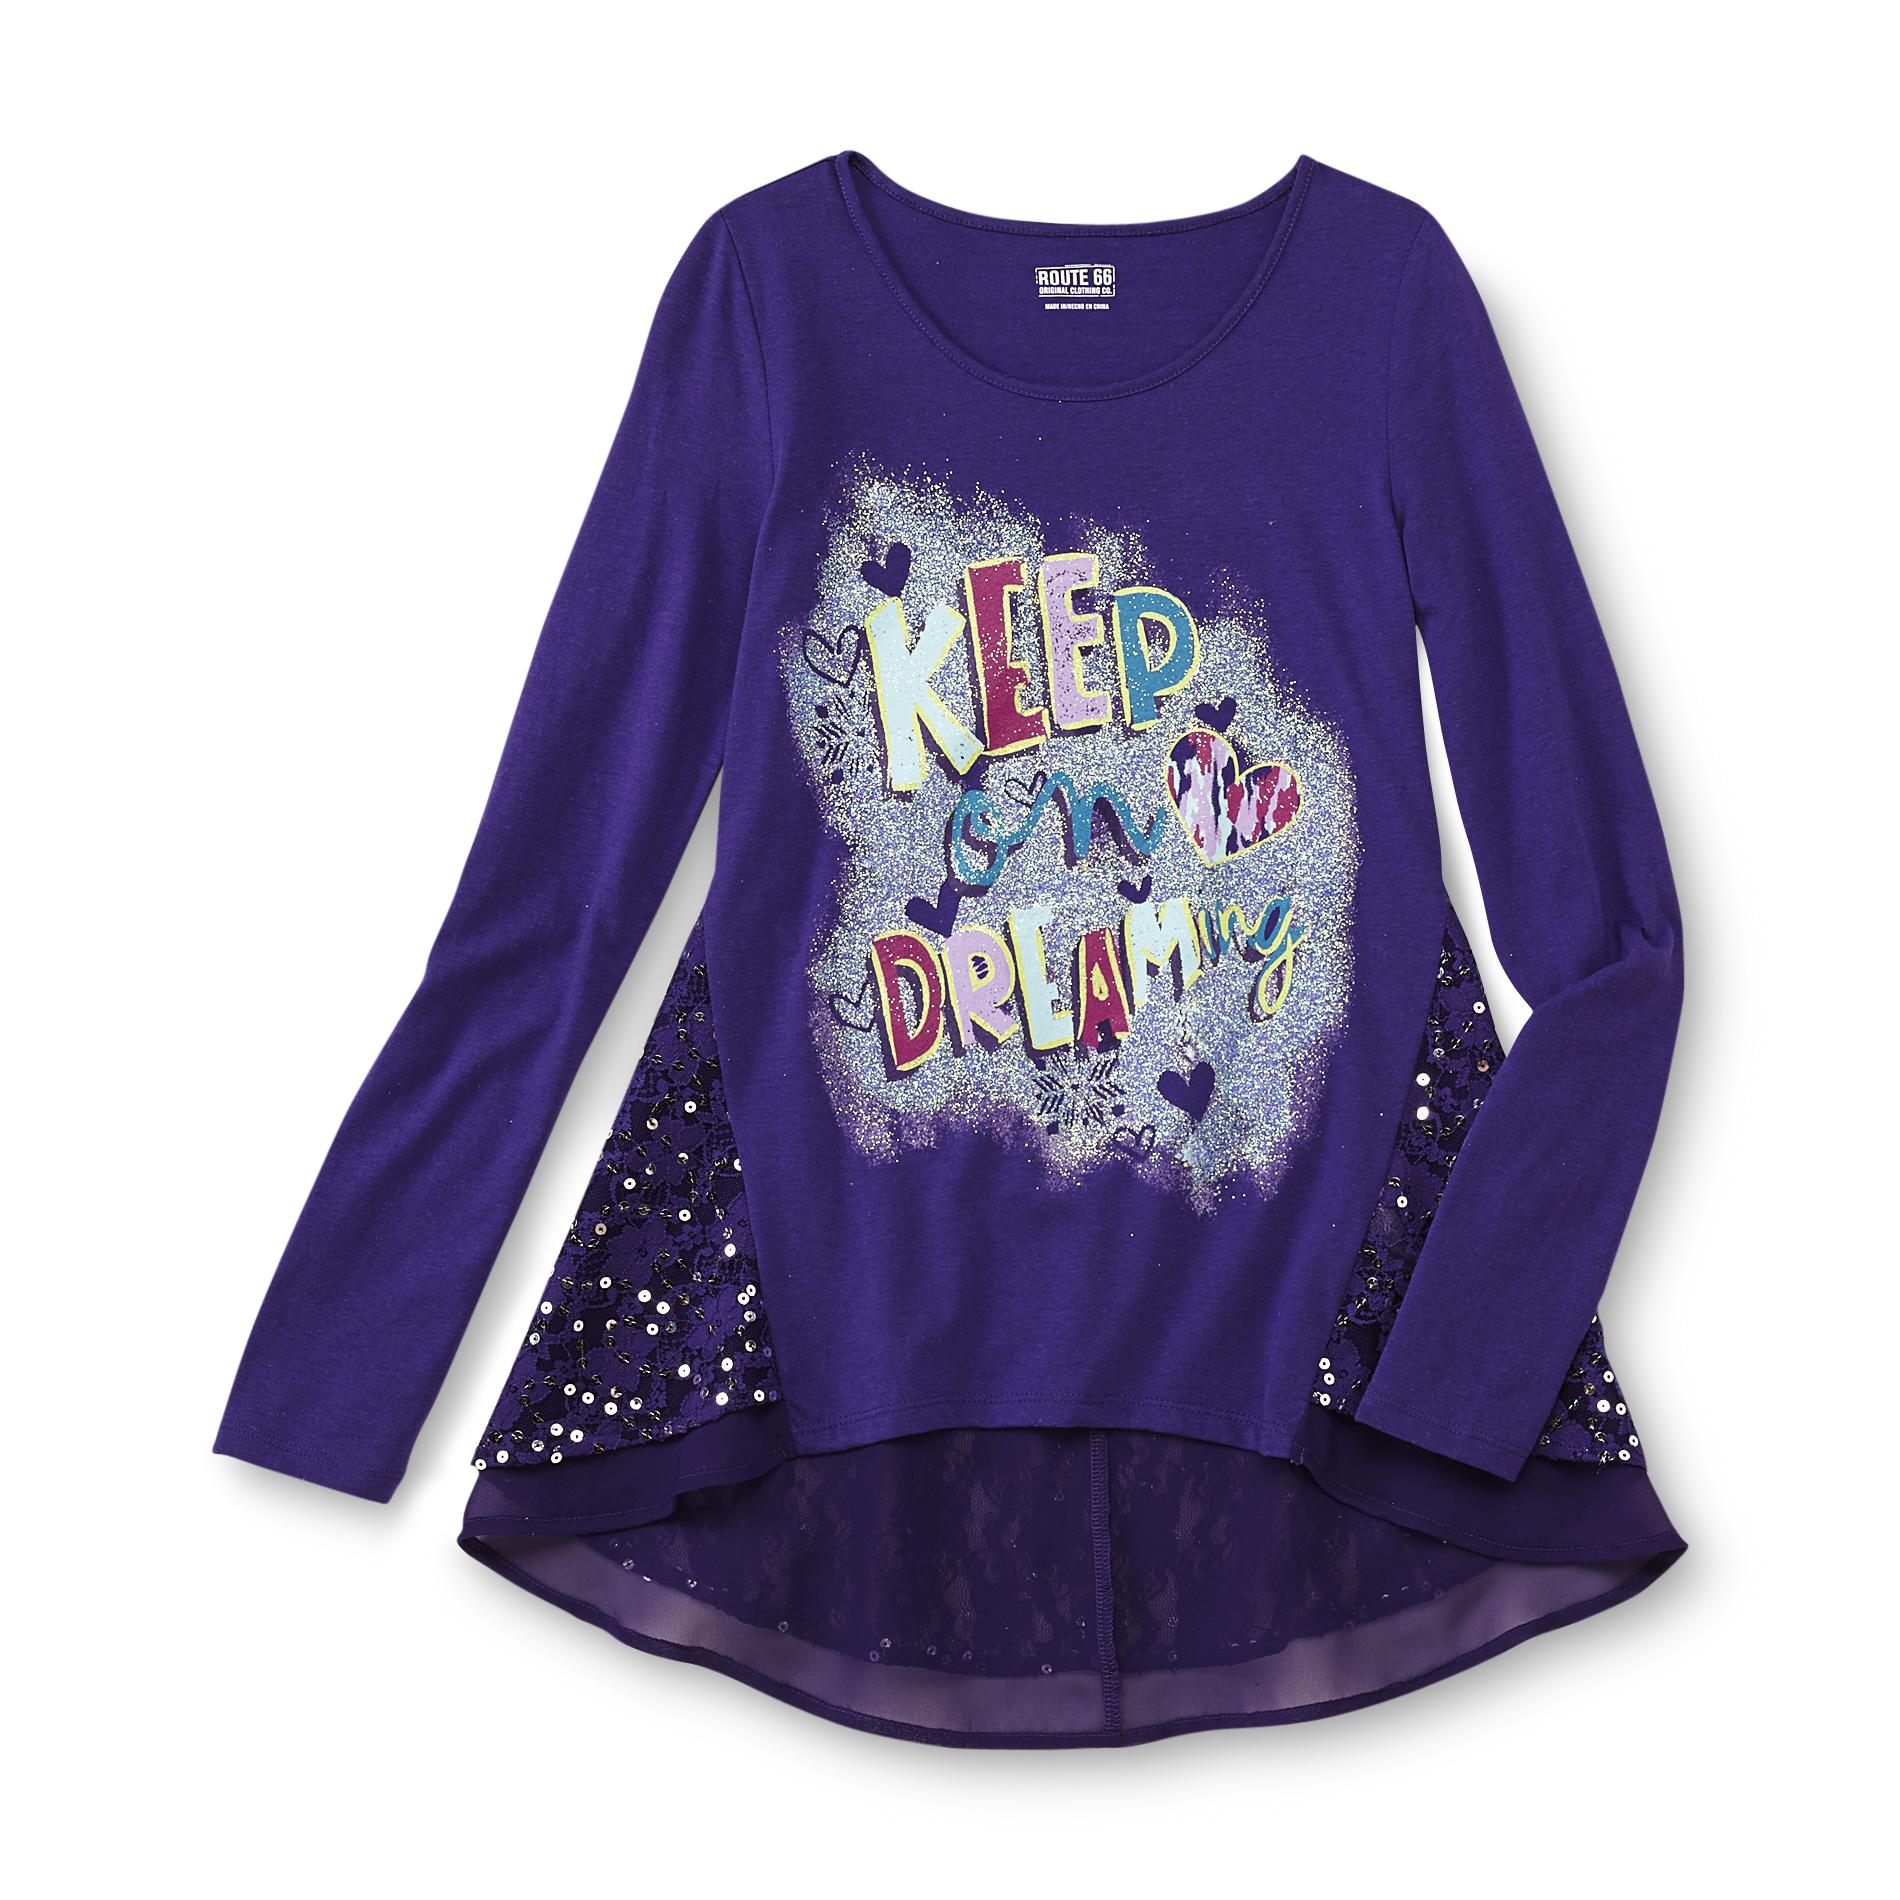 Route 66 Girl's Embellished Long-Sleeve Graphic Shirt - Keep On Dreaming